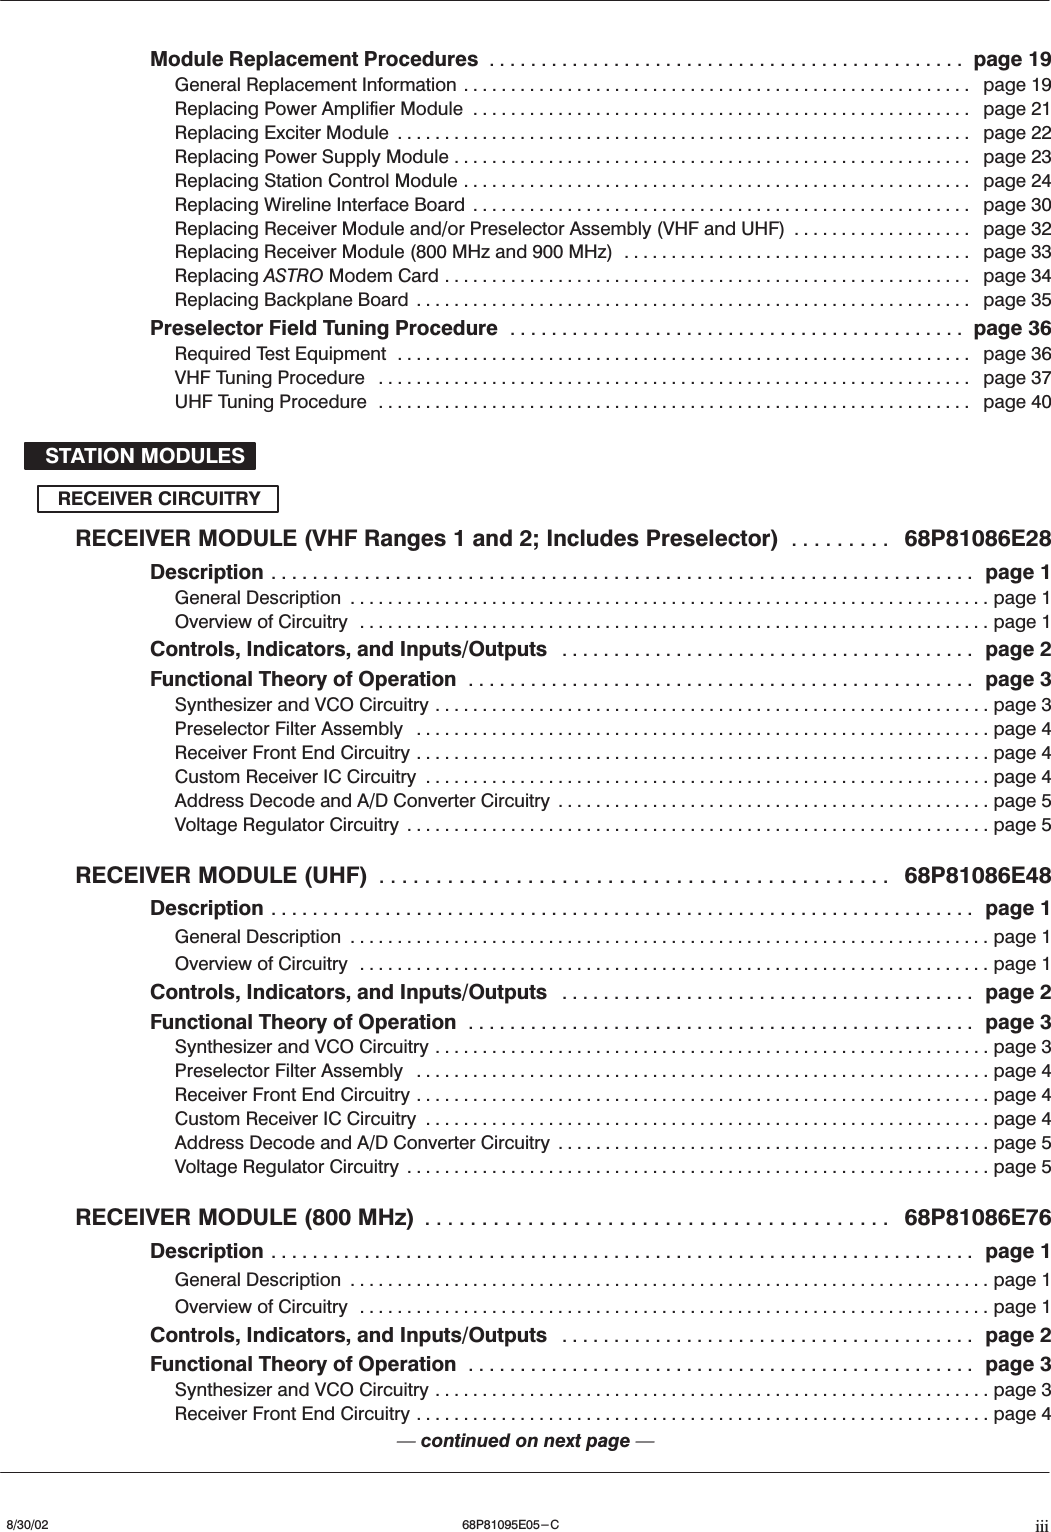 iii8/30/02 68P81095E05-CModule Replacement Procedures page 19..............................................General Replacement Information page 19......................................................Replacing Power Amplifier Module page 21.....................................................Replacing Exciter Module page 22.............................................................Replacing Power Supply Module page 23.......................................................Replacing Station Control Module page 24......................................................Replacing Wireline Interface Board page 30.....................................................Replacing Receiver Module and/or Preselector Assembly (VHF and UHF) page 32...................Replacing Receiver Module (800 MHz and 900 MHz) page 33.....................................Replacing ASTRO Modem Card page 34........................................................Replacing Backplane Board page 35...........................................................Preselector Field Tuning Procedure page 36............................................Required Test Equipment page 36.............................................................VHF Tuning Procedure page 37...............................................................UHF Tuning Procedure page 40...............................................................STATION MODULESRECEIVER CIRCUITRYRECEIVER MODULE (VHF Ranges 1 and 2; Includes Preselector) 68P81086E28.........Description page 1....................................................................General Description page 1....................................................................Overview of Circuitry page 1...................................................................Controls, Indicators, and Inputs/Outputs page 2........................................Functional Theory of Operation page 3.................................................Synthesizer and VCO Circuitry page 3...........................................................Preselector Filter Assembly page 4.............................................................Receiver Front End Circuitry page 4.............................................................Custom Receiver IC Circuitry page 4............................................................Address Decode and A/D Converter Circuitry page 5..............................................Voltage Regulator Circuitry page 5..............................................................RECEIVER MODULE (UHF) 68P81086E48.............................................Description page 1....................................................................General Description page 1....................................................................Overview of Circuitry page 1...................................................................Controls, Indicators, and Inputs/Outputs page 2........................................Functional Theory of Operation page 3.................................................Synthesizer and VCO Circuitry page 3...........................................................Preselector Filter Assembly page 4.............................................................Receiver Front End Circuitry page 4.............................................................Custom Receiver IC Circuitry page 4............................................................Address Decode and A/D Converter Circuitry page 5..............................................Voltage Regulator Circuitry page 5..............................................................RECEIVER MODULE (800 MHz) 68P81086E76.........................................Description page 1....................................................................General Description page 1....................................................................Overview of Circuitry page 1...................................................................Controls, Indicators, and Inputs/Outputs page 2........................................Functional Theory of Operation page 3.................................................Synthesizer and VCO Circuitry page 3...........................................................Receiver Front End Circuitry page 4.............................................................Ċcontinued on next page Ċ